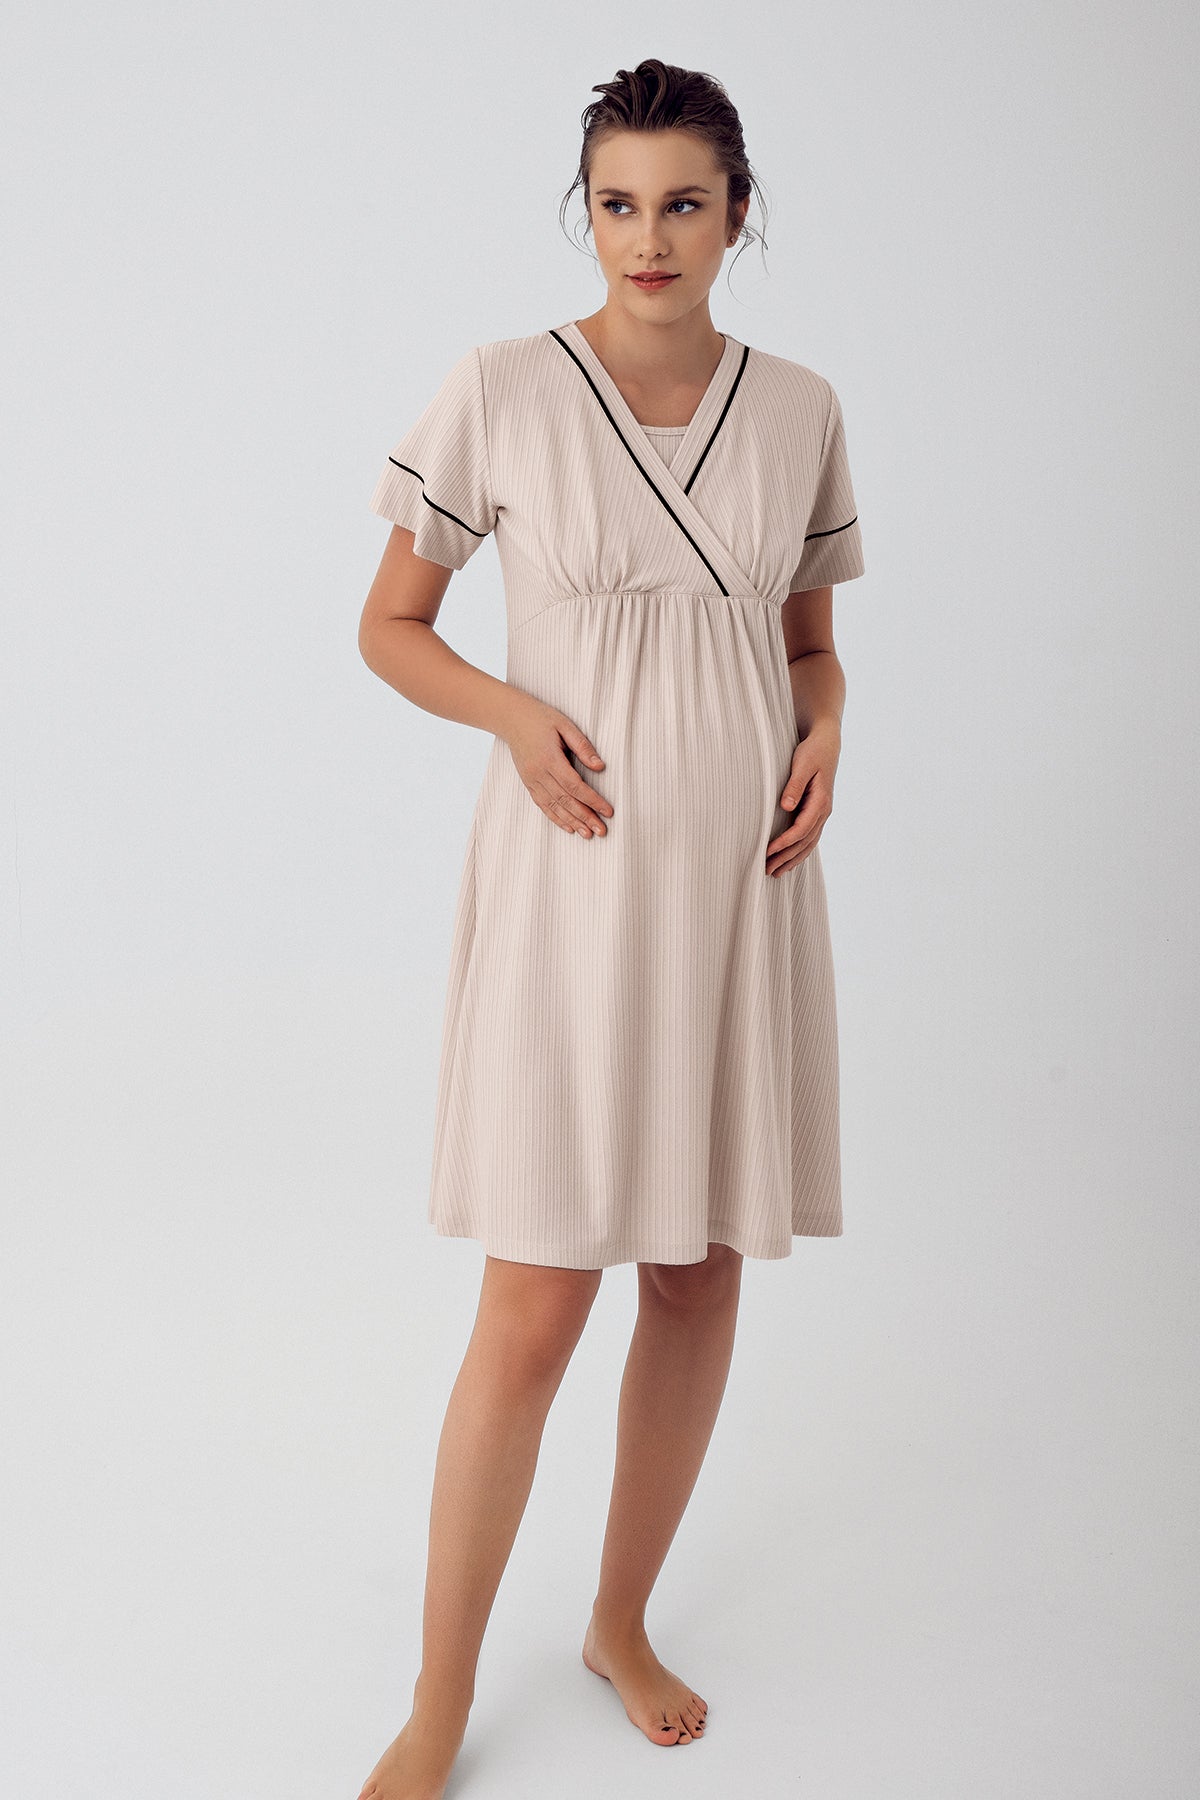 Shopymommy 16102 Double Breasted Maternity & Nursing Nightgown Beige